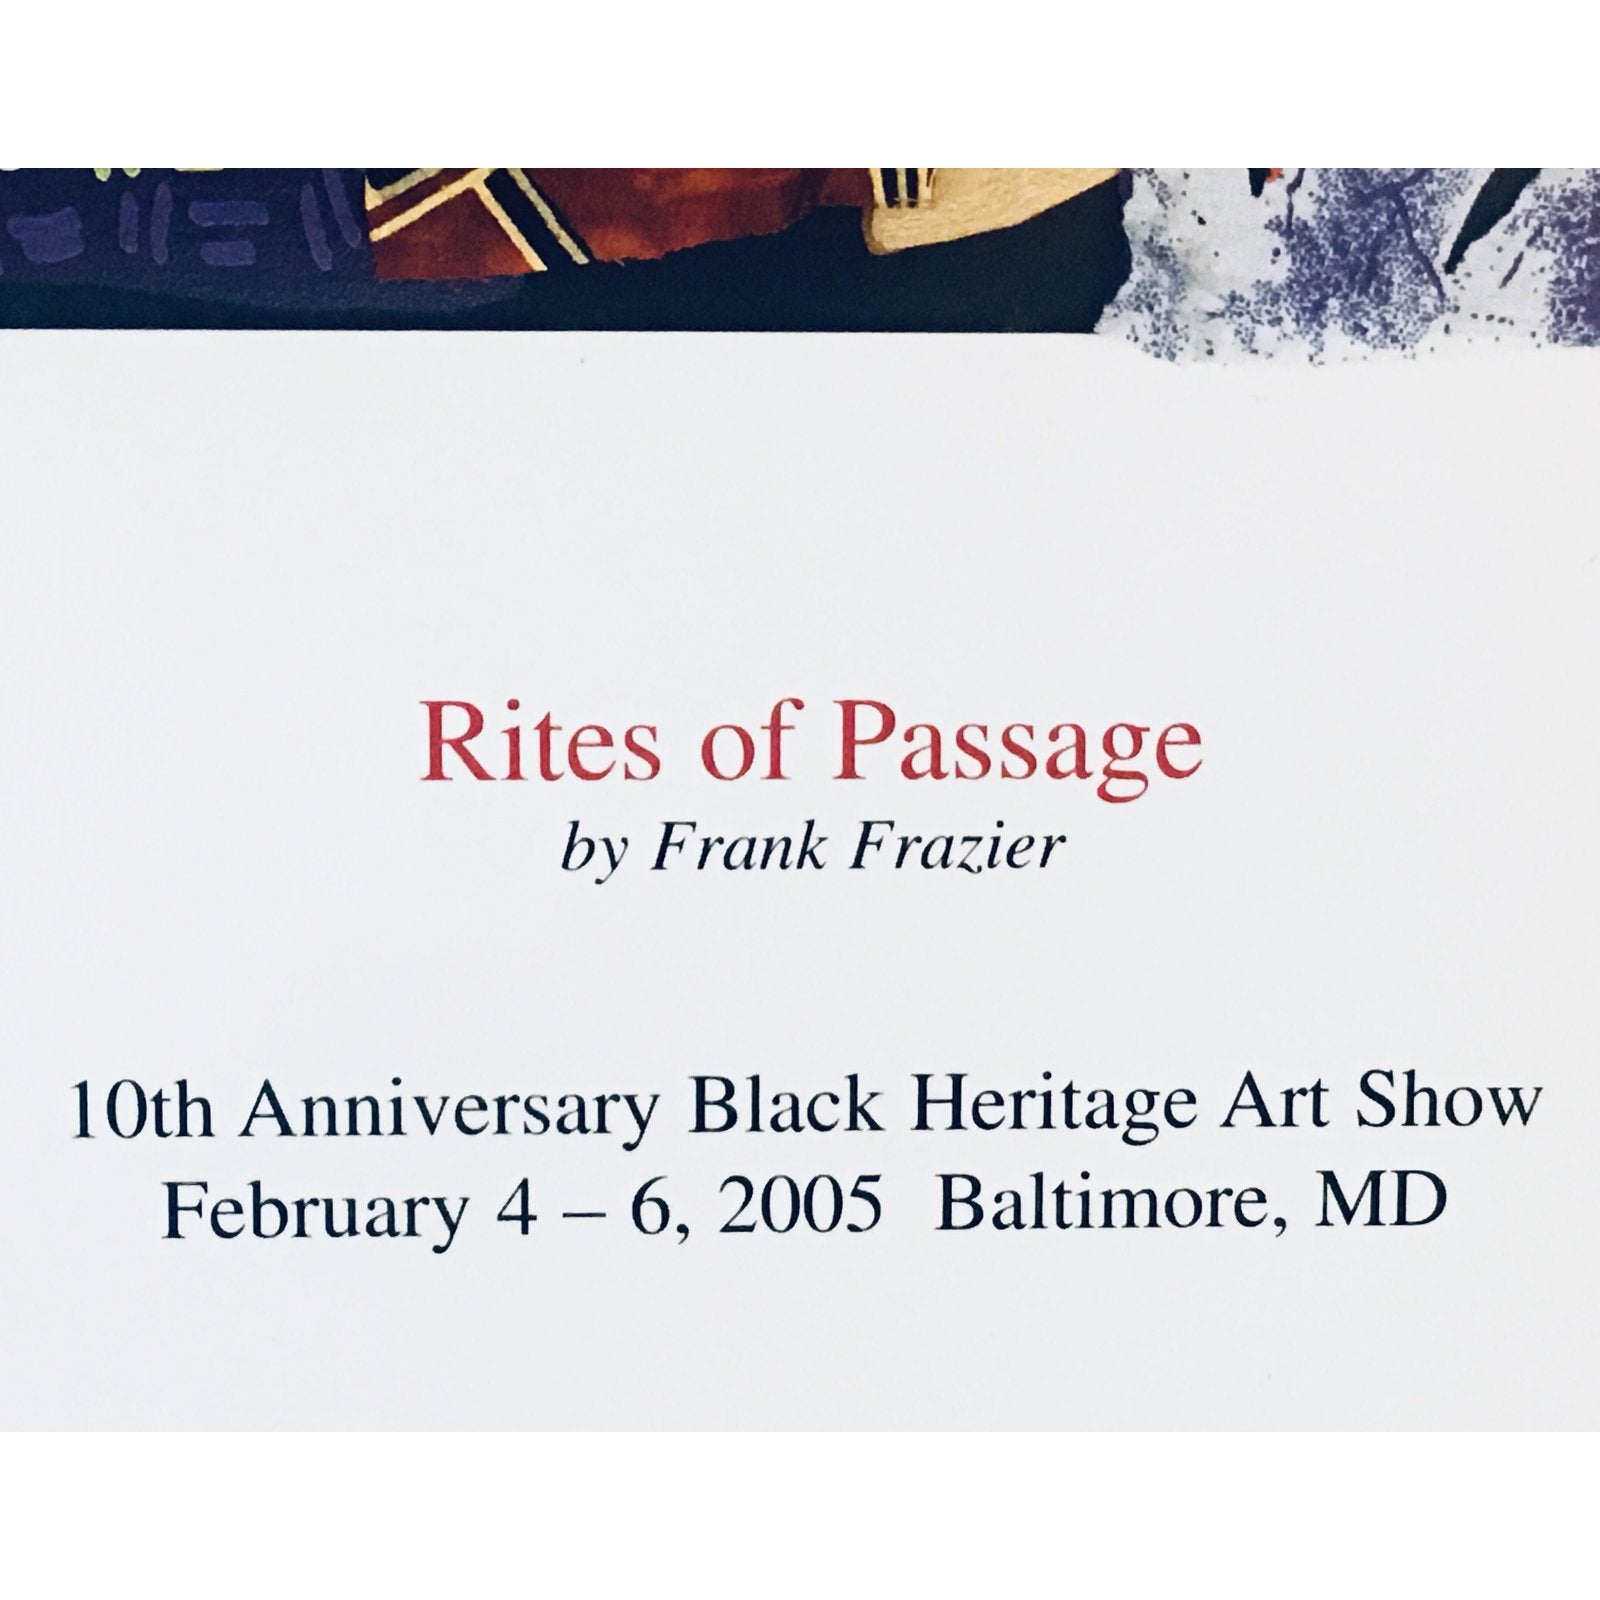 Modern African American Heritage Art Show “Rites of Passage” Poster Print by Frank Frazier ABBY ESSIE